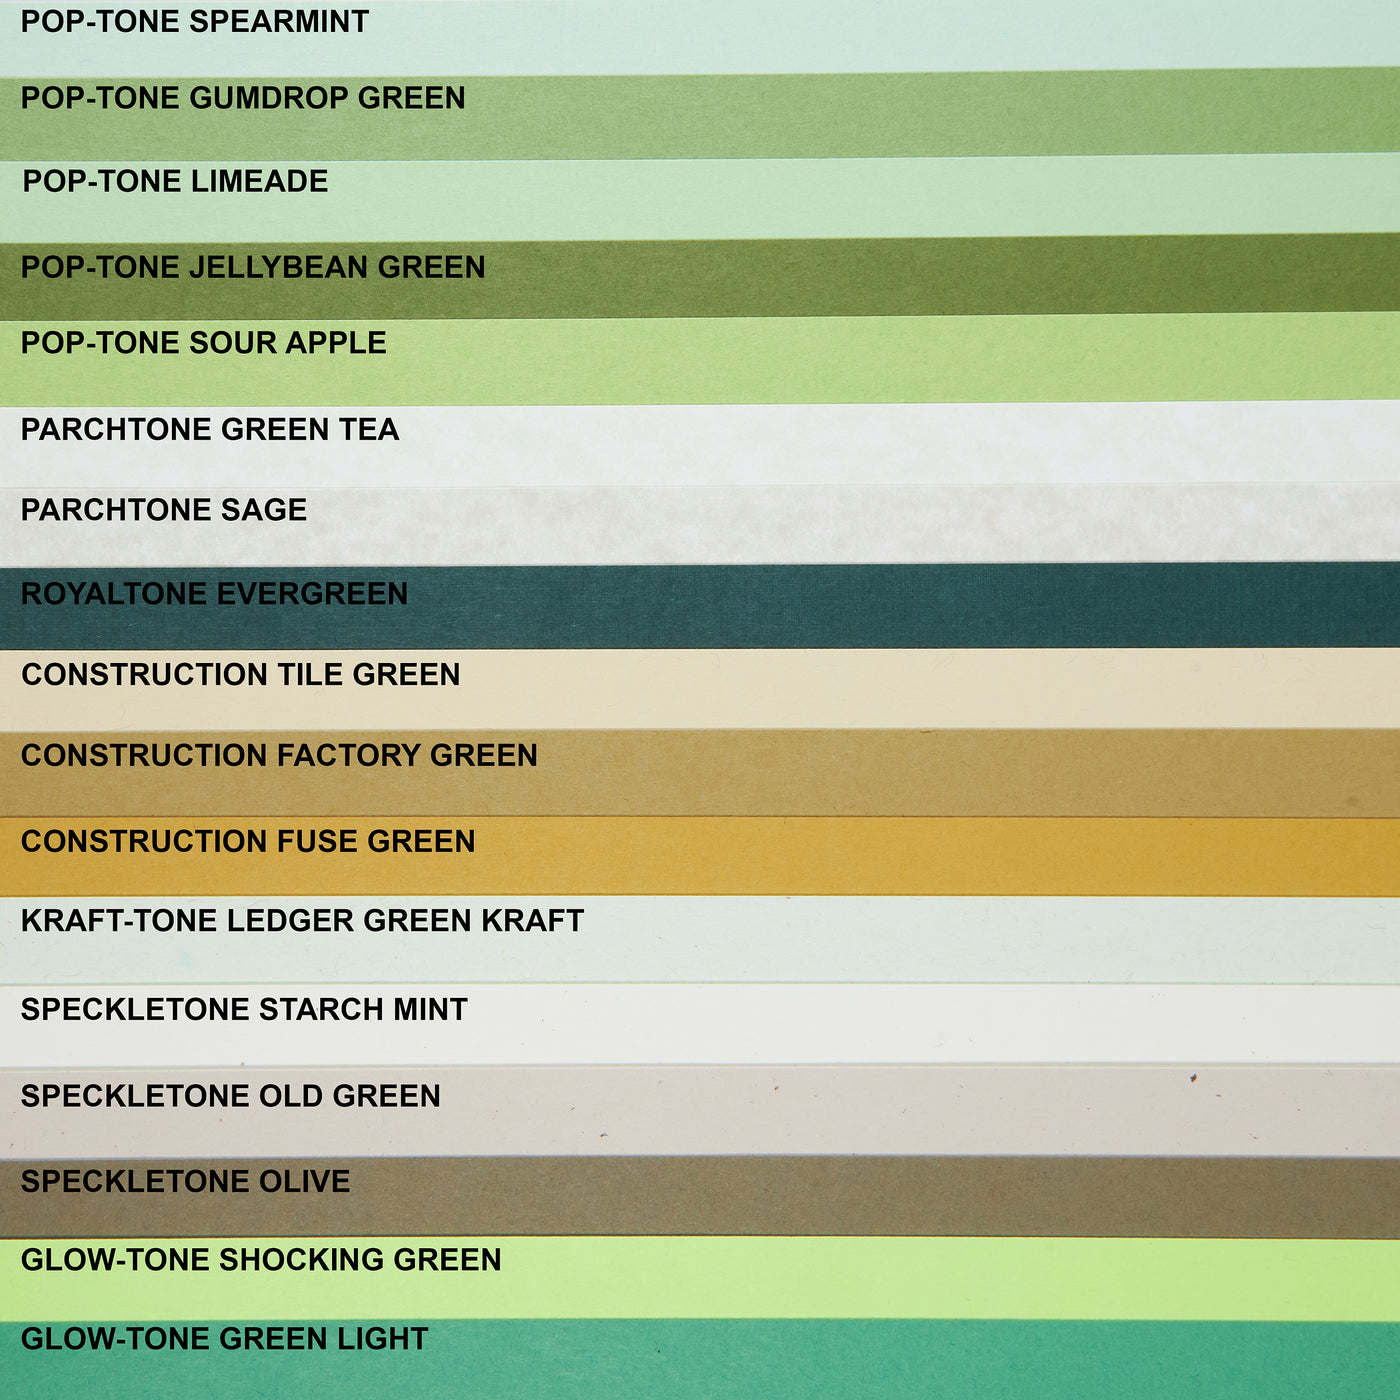 Green Tea Paper (Parchtone, Text Weight)